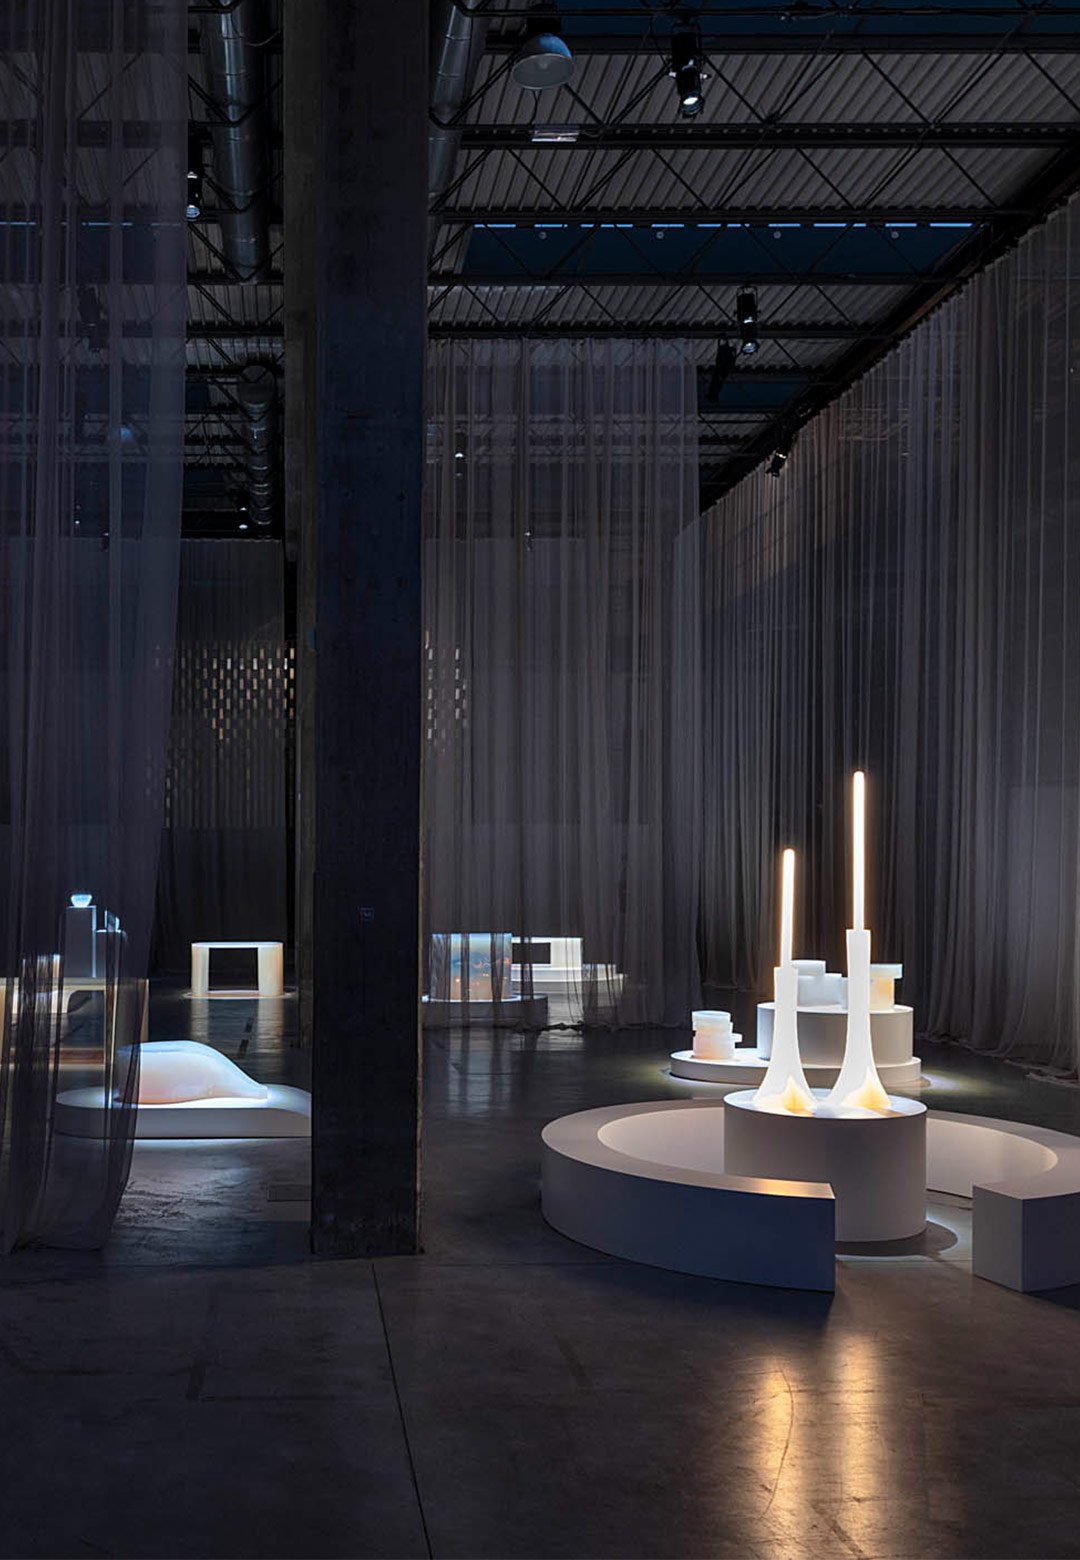 Objects of Common Interest presents iridescent designs at Milan Design Week